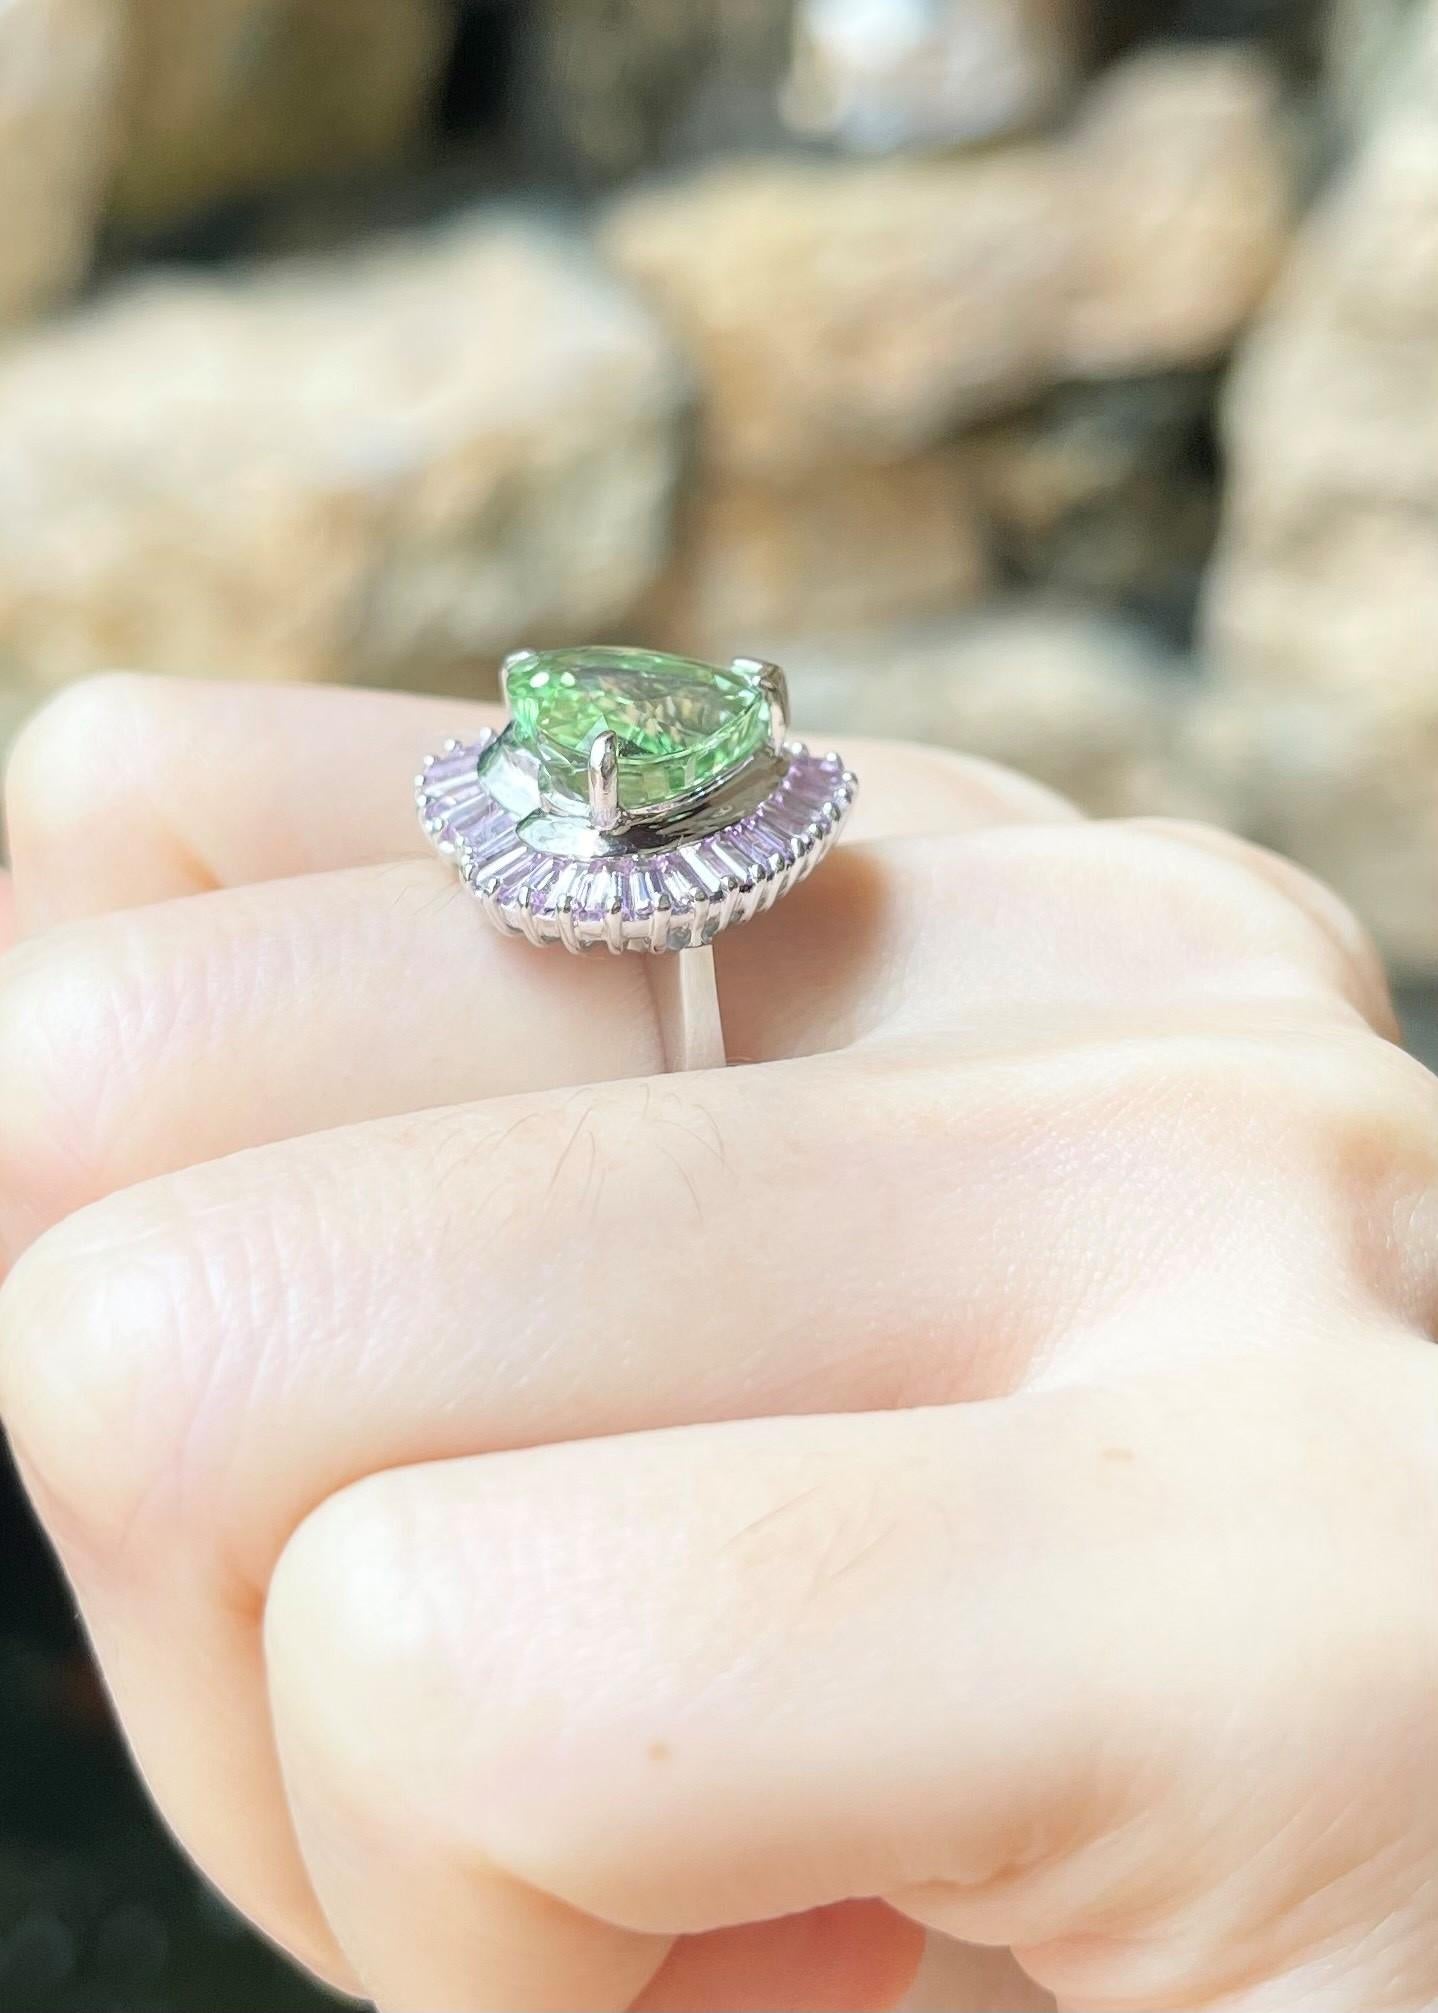 Green Tourmaline 5.24 carats with Pink Sapphire 1.55 carats Ring set in 18K White Gold Settings

Width:  1.8 cm 
Length: 1.8 cm
Ring Size: 49
Total Weight: 11.02 grams

